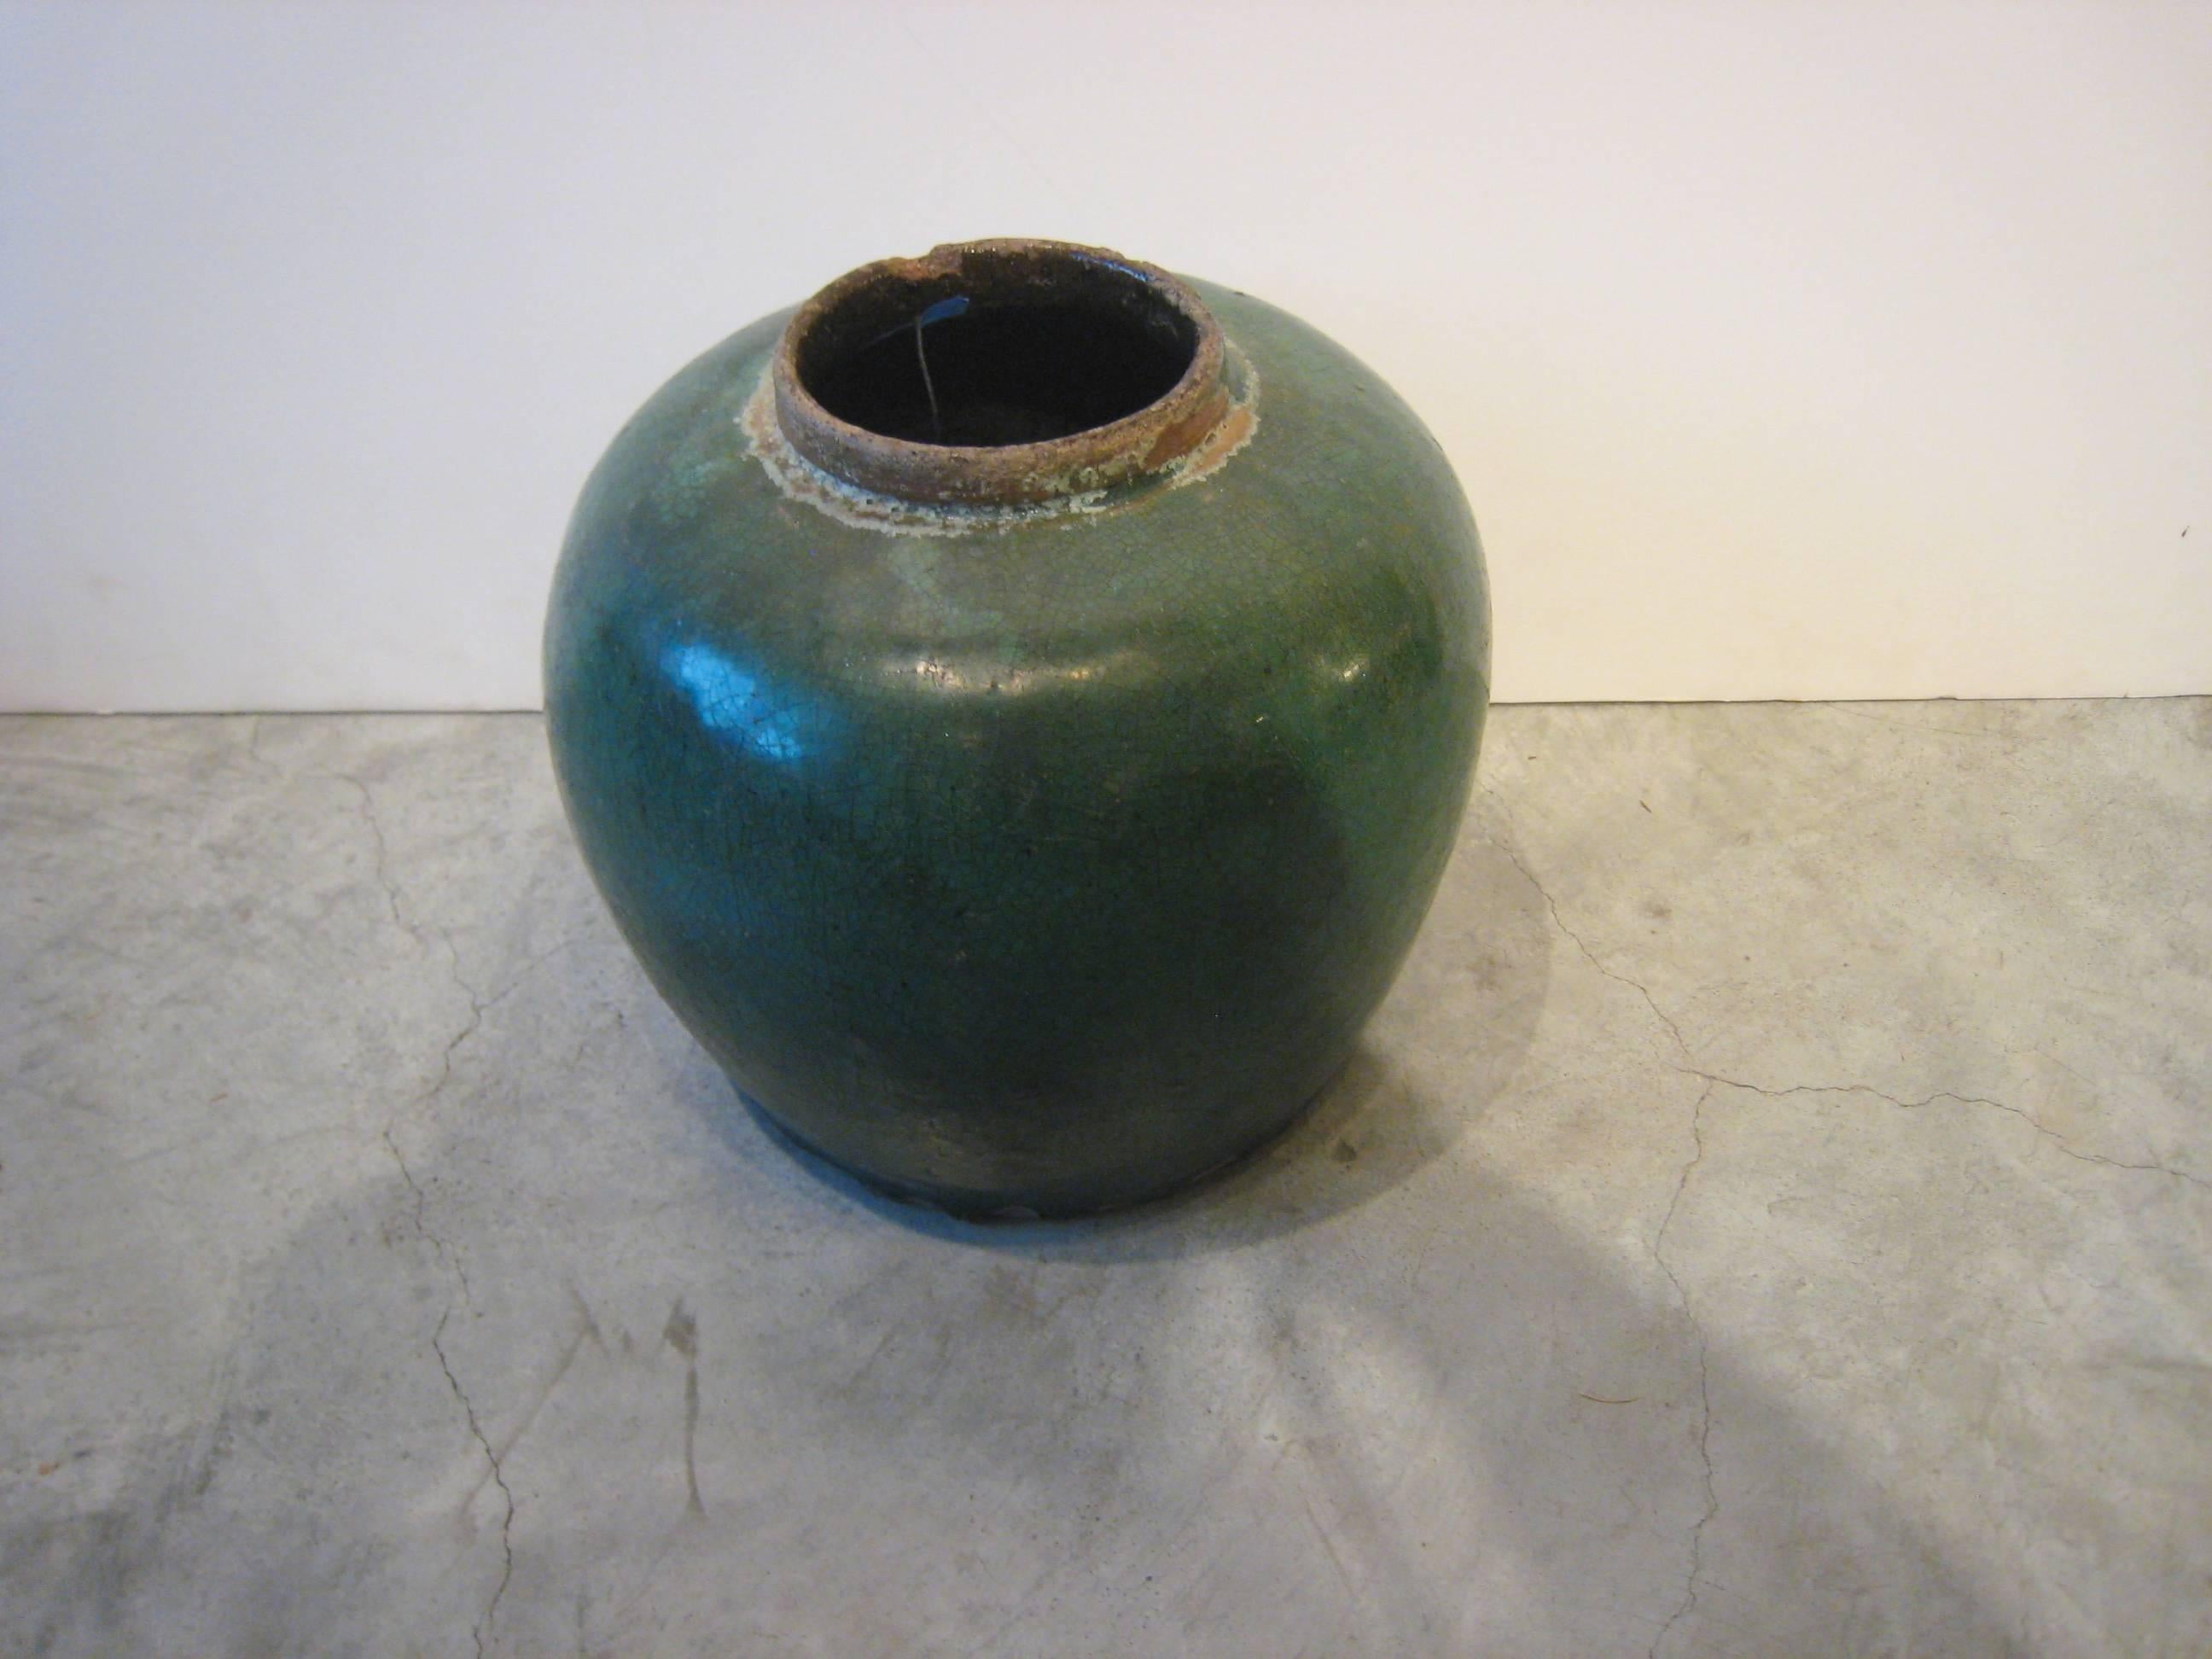 Antique Chinese ceramic ginger jar, classically shaped and beautifully glazed.
From Hunan province, circa 1880.
CR701.